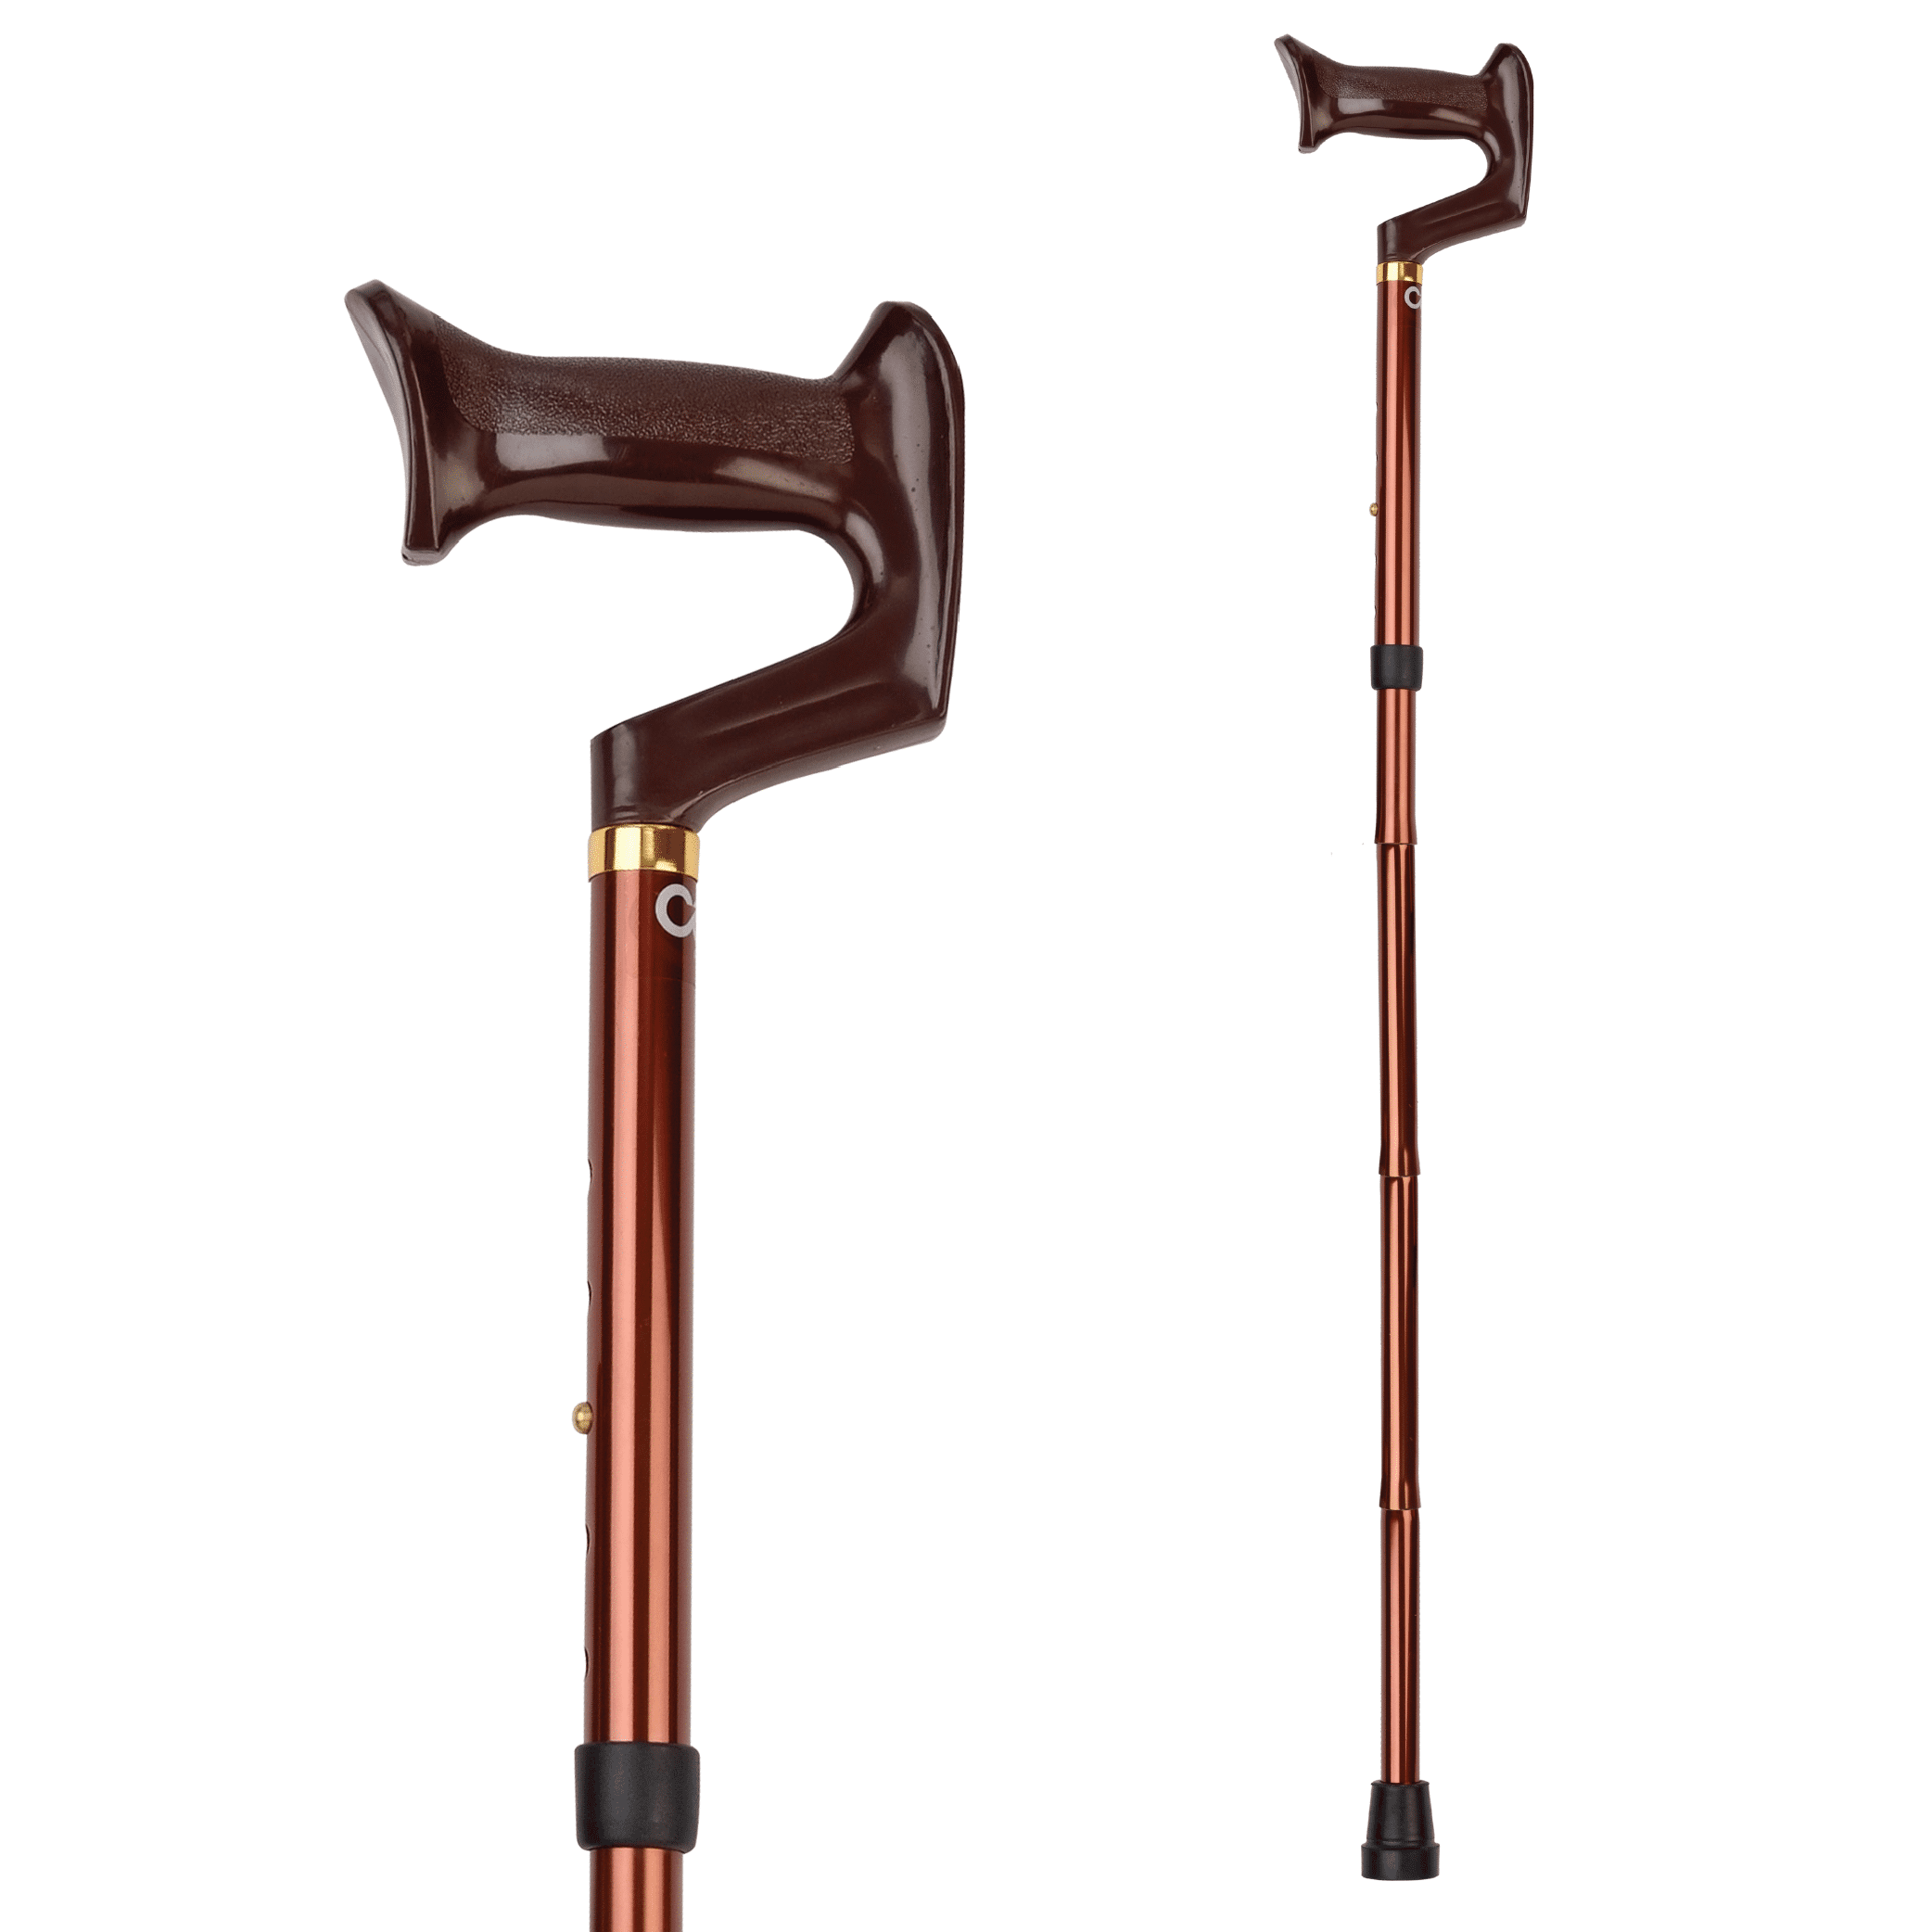 Carex York Folding Adjustable Walking Cane for All Occasions